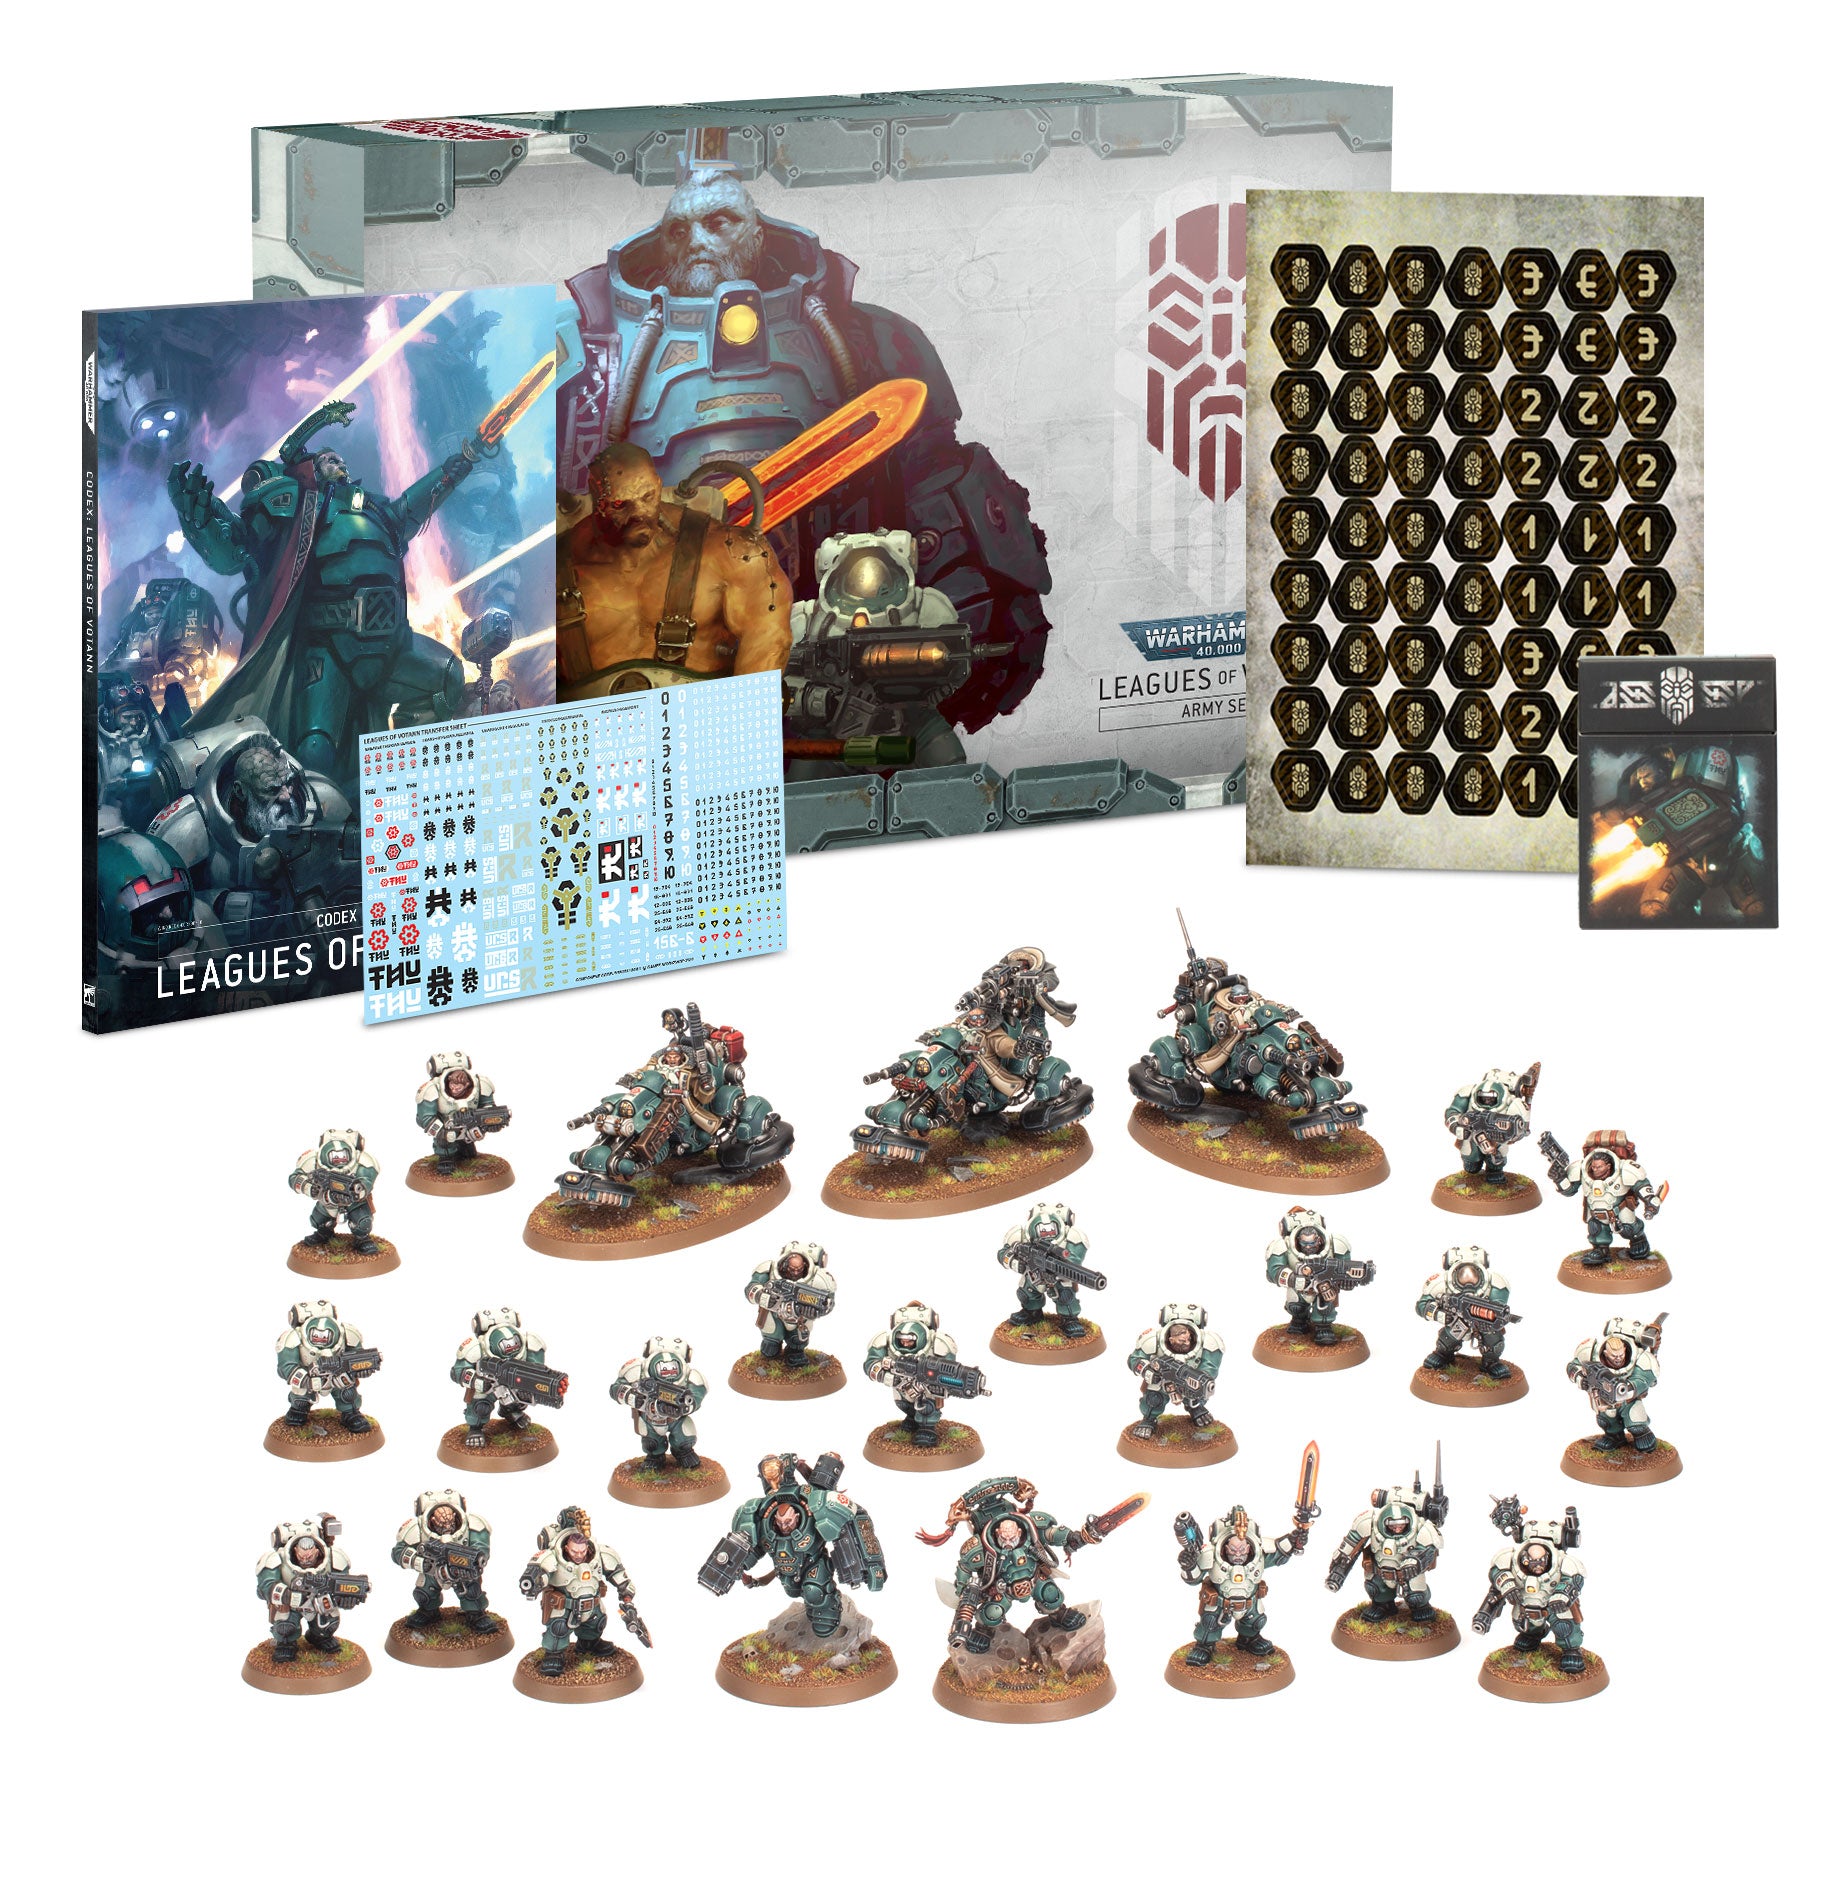 Warhammer 40k - Leagues of Votann Army Set - Bards & Cards